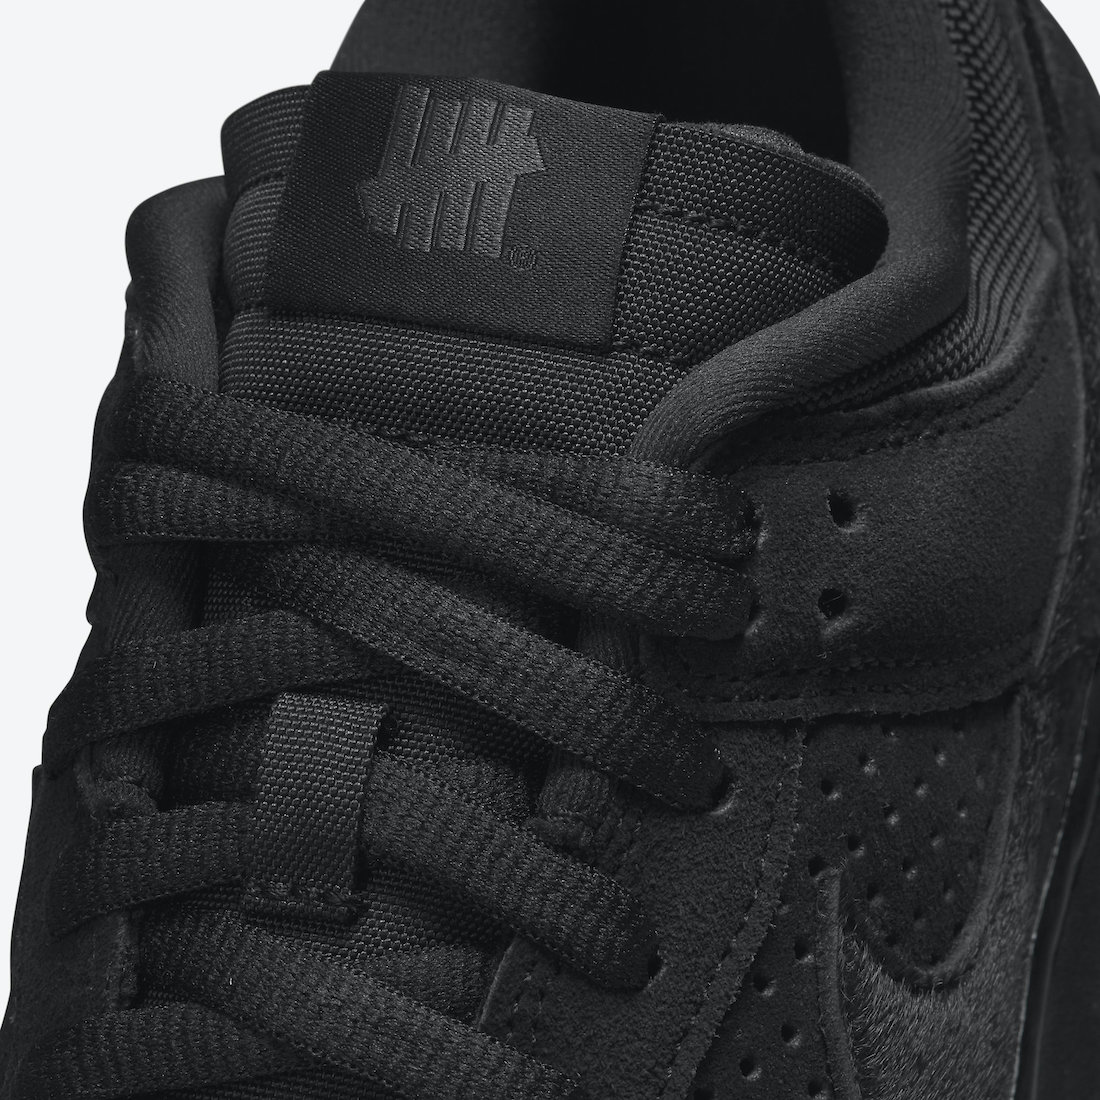 Undefeated Nike Dunk Low Black DO9329-001 Release Date